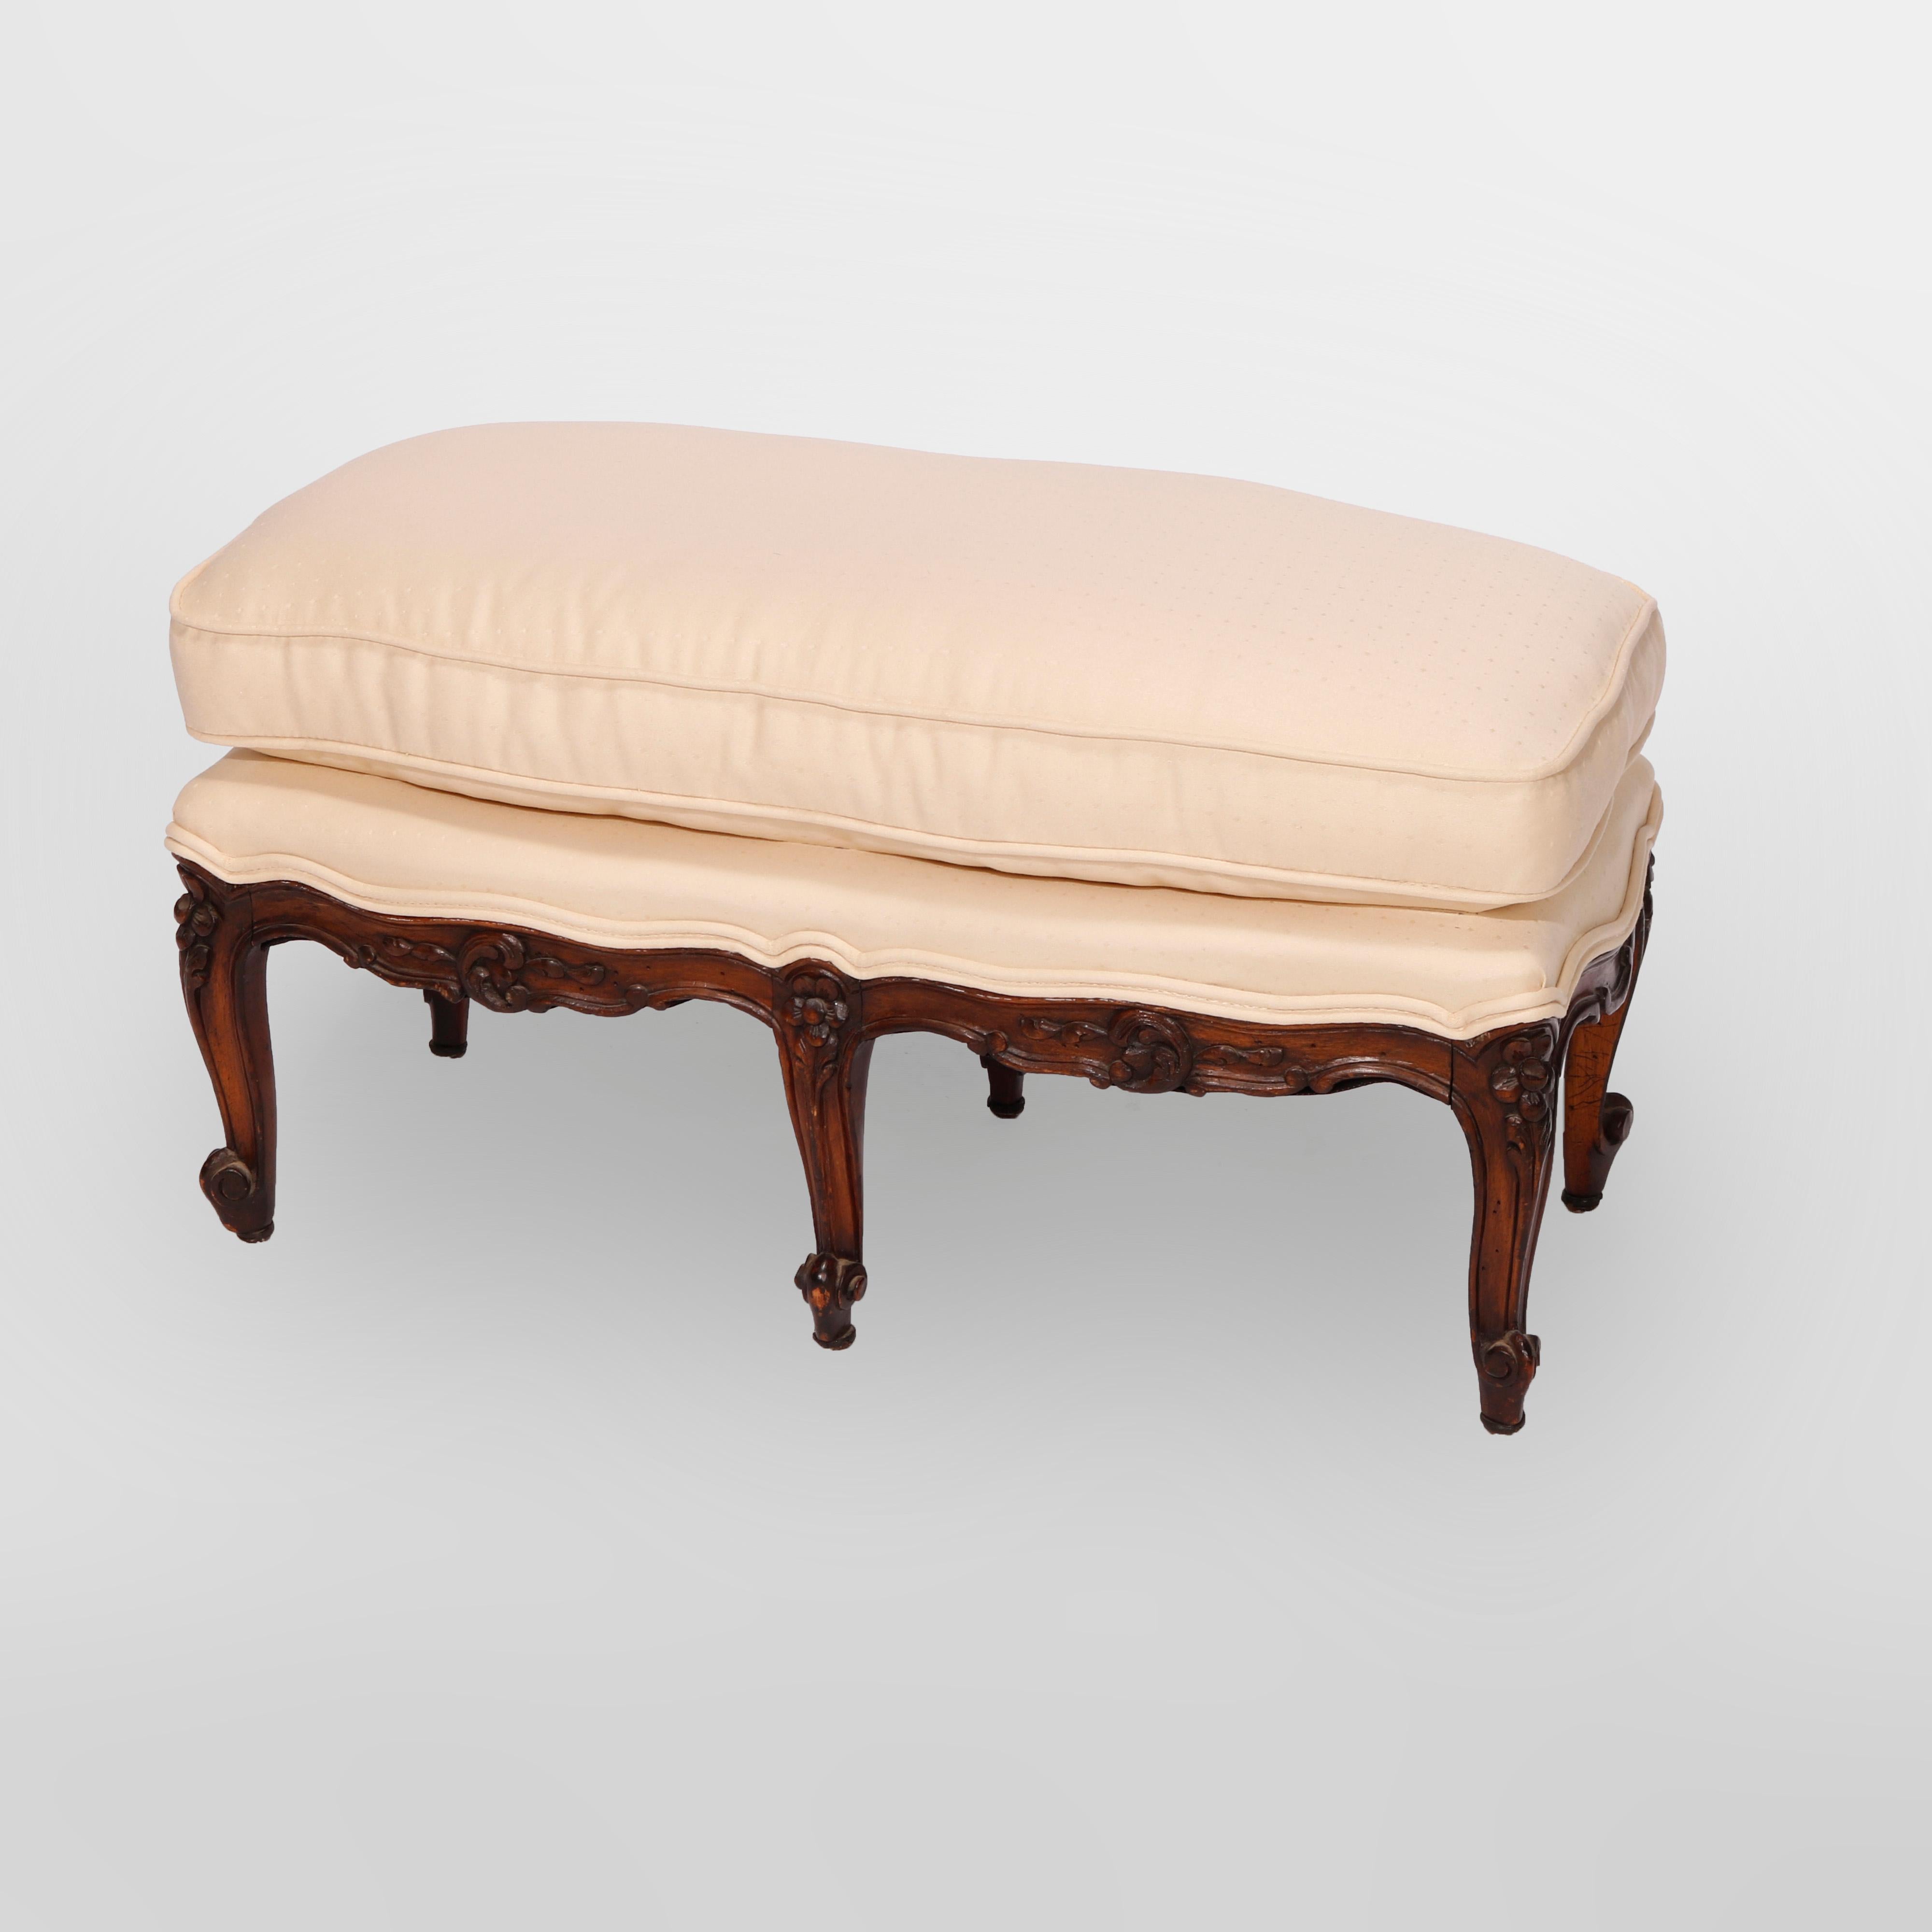 An antique French Louis XIV style ottoman offers upholstered attached cushion over walnut frame with shaped skirt raised on six cabriole legs having carved floral capitals and terminating in stylized scroll feet, 19th century

Measures - 13.75'' H x